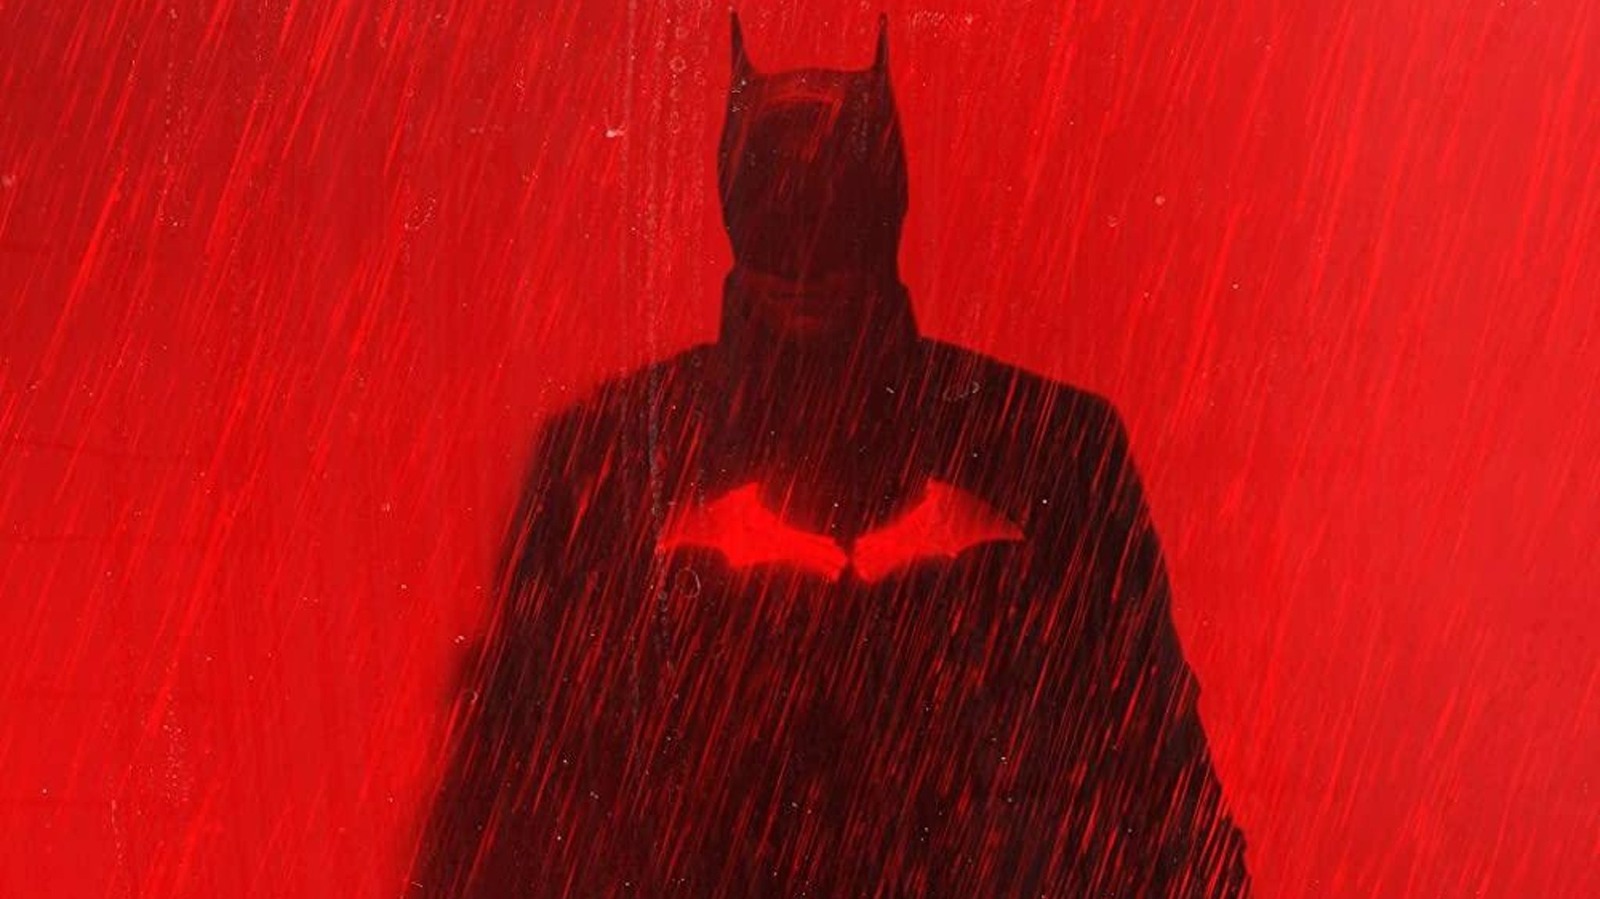 New Plot Details For The Batman Have Been Revealed